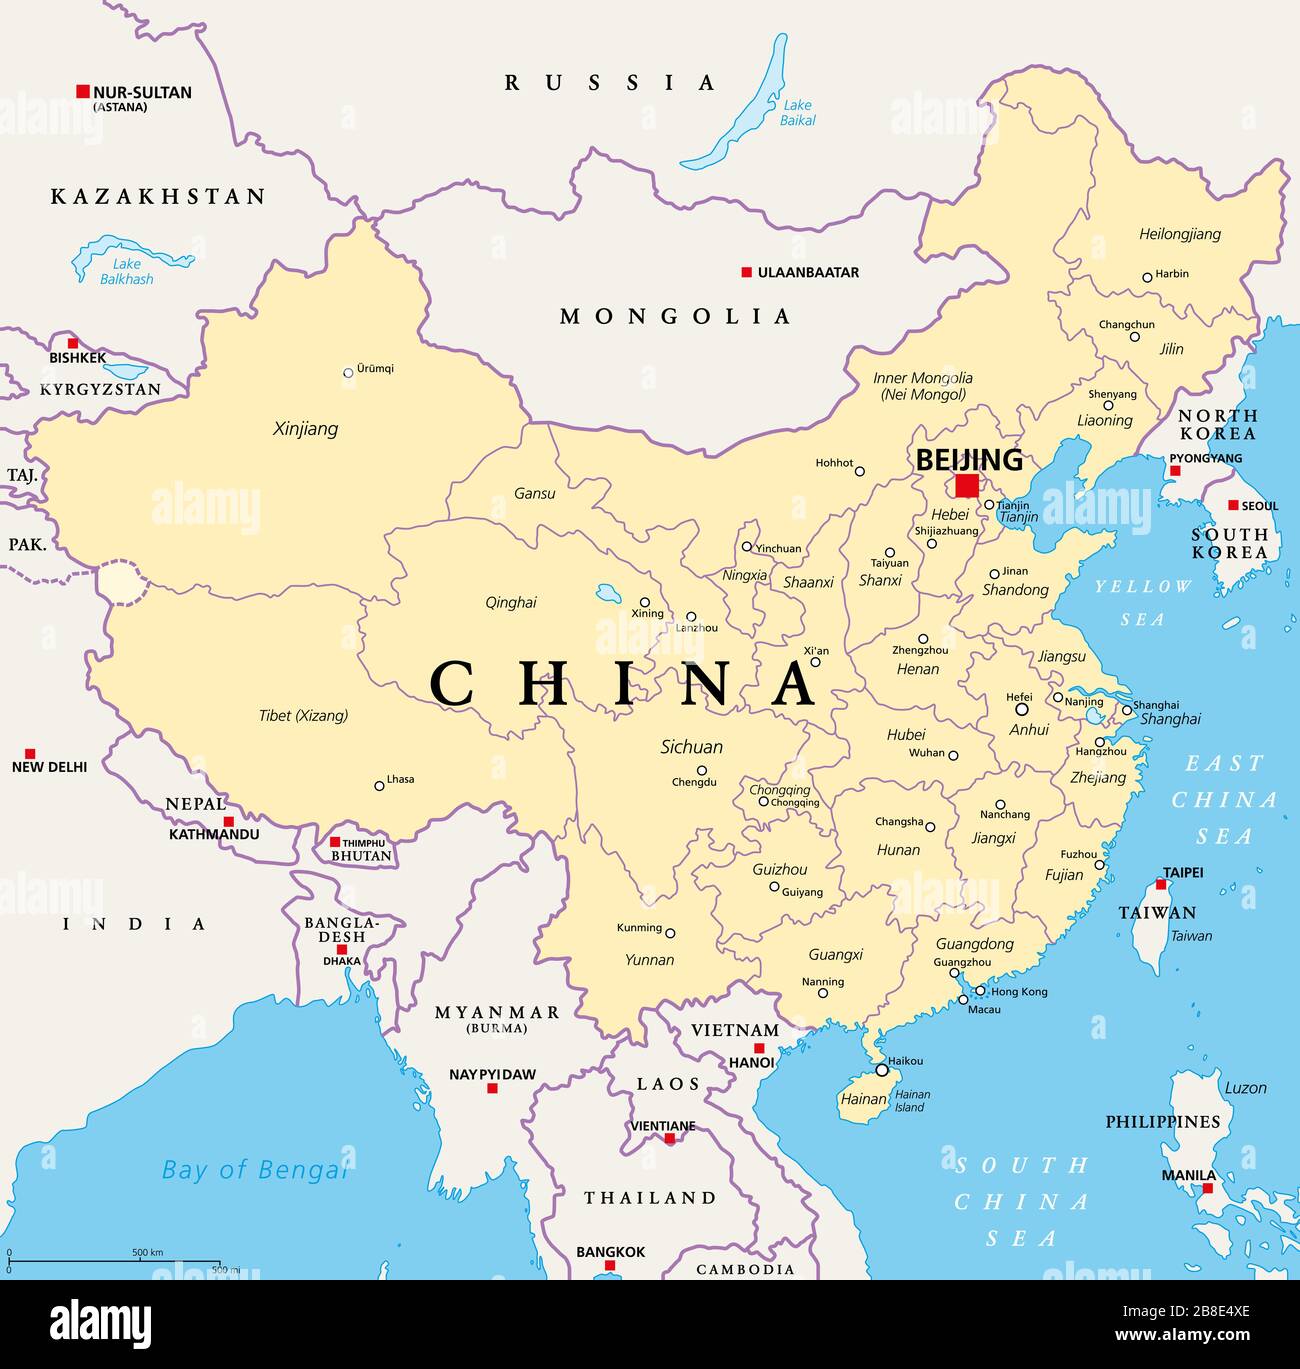 China, political map, with administrative divisions. PRC, People's Republic of China, capital Beijing, provinces with capitals, borders. Stock Photo